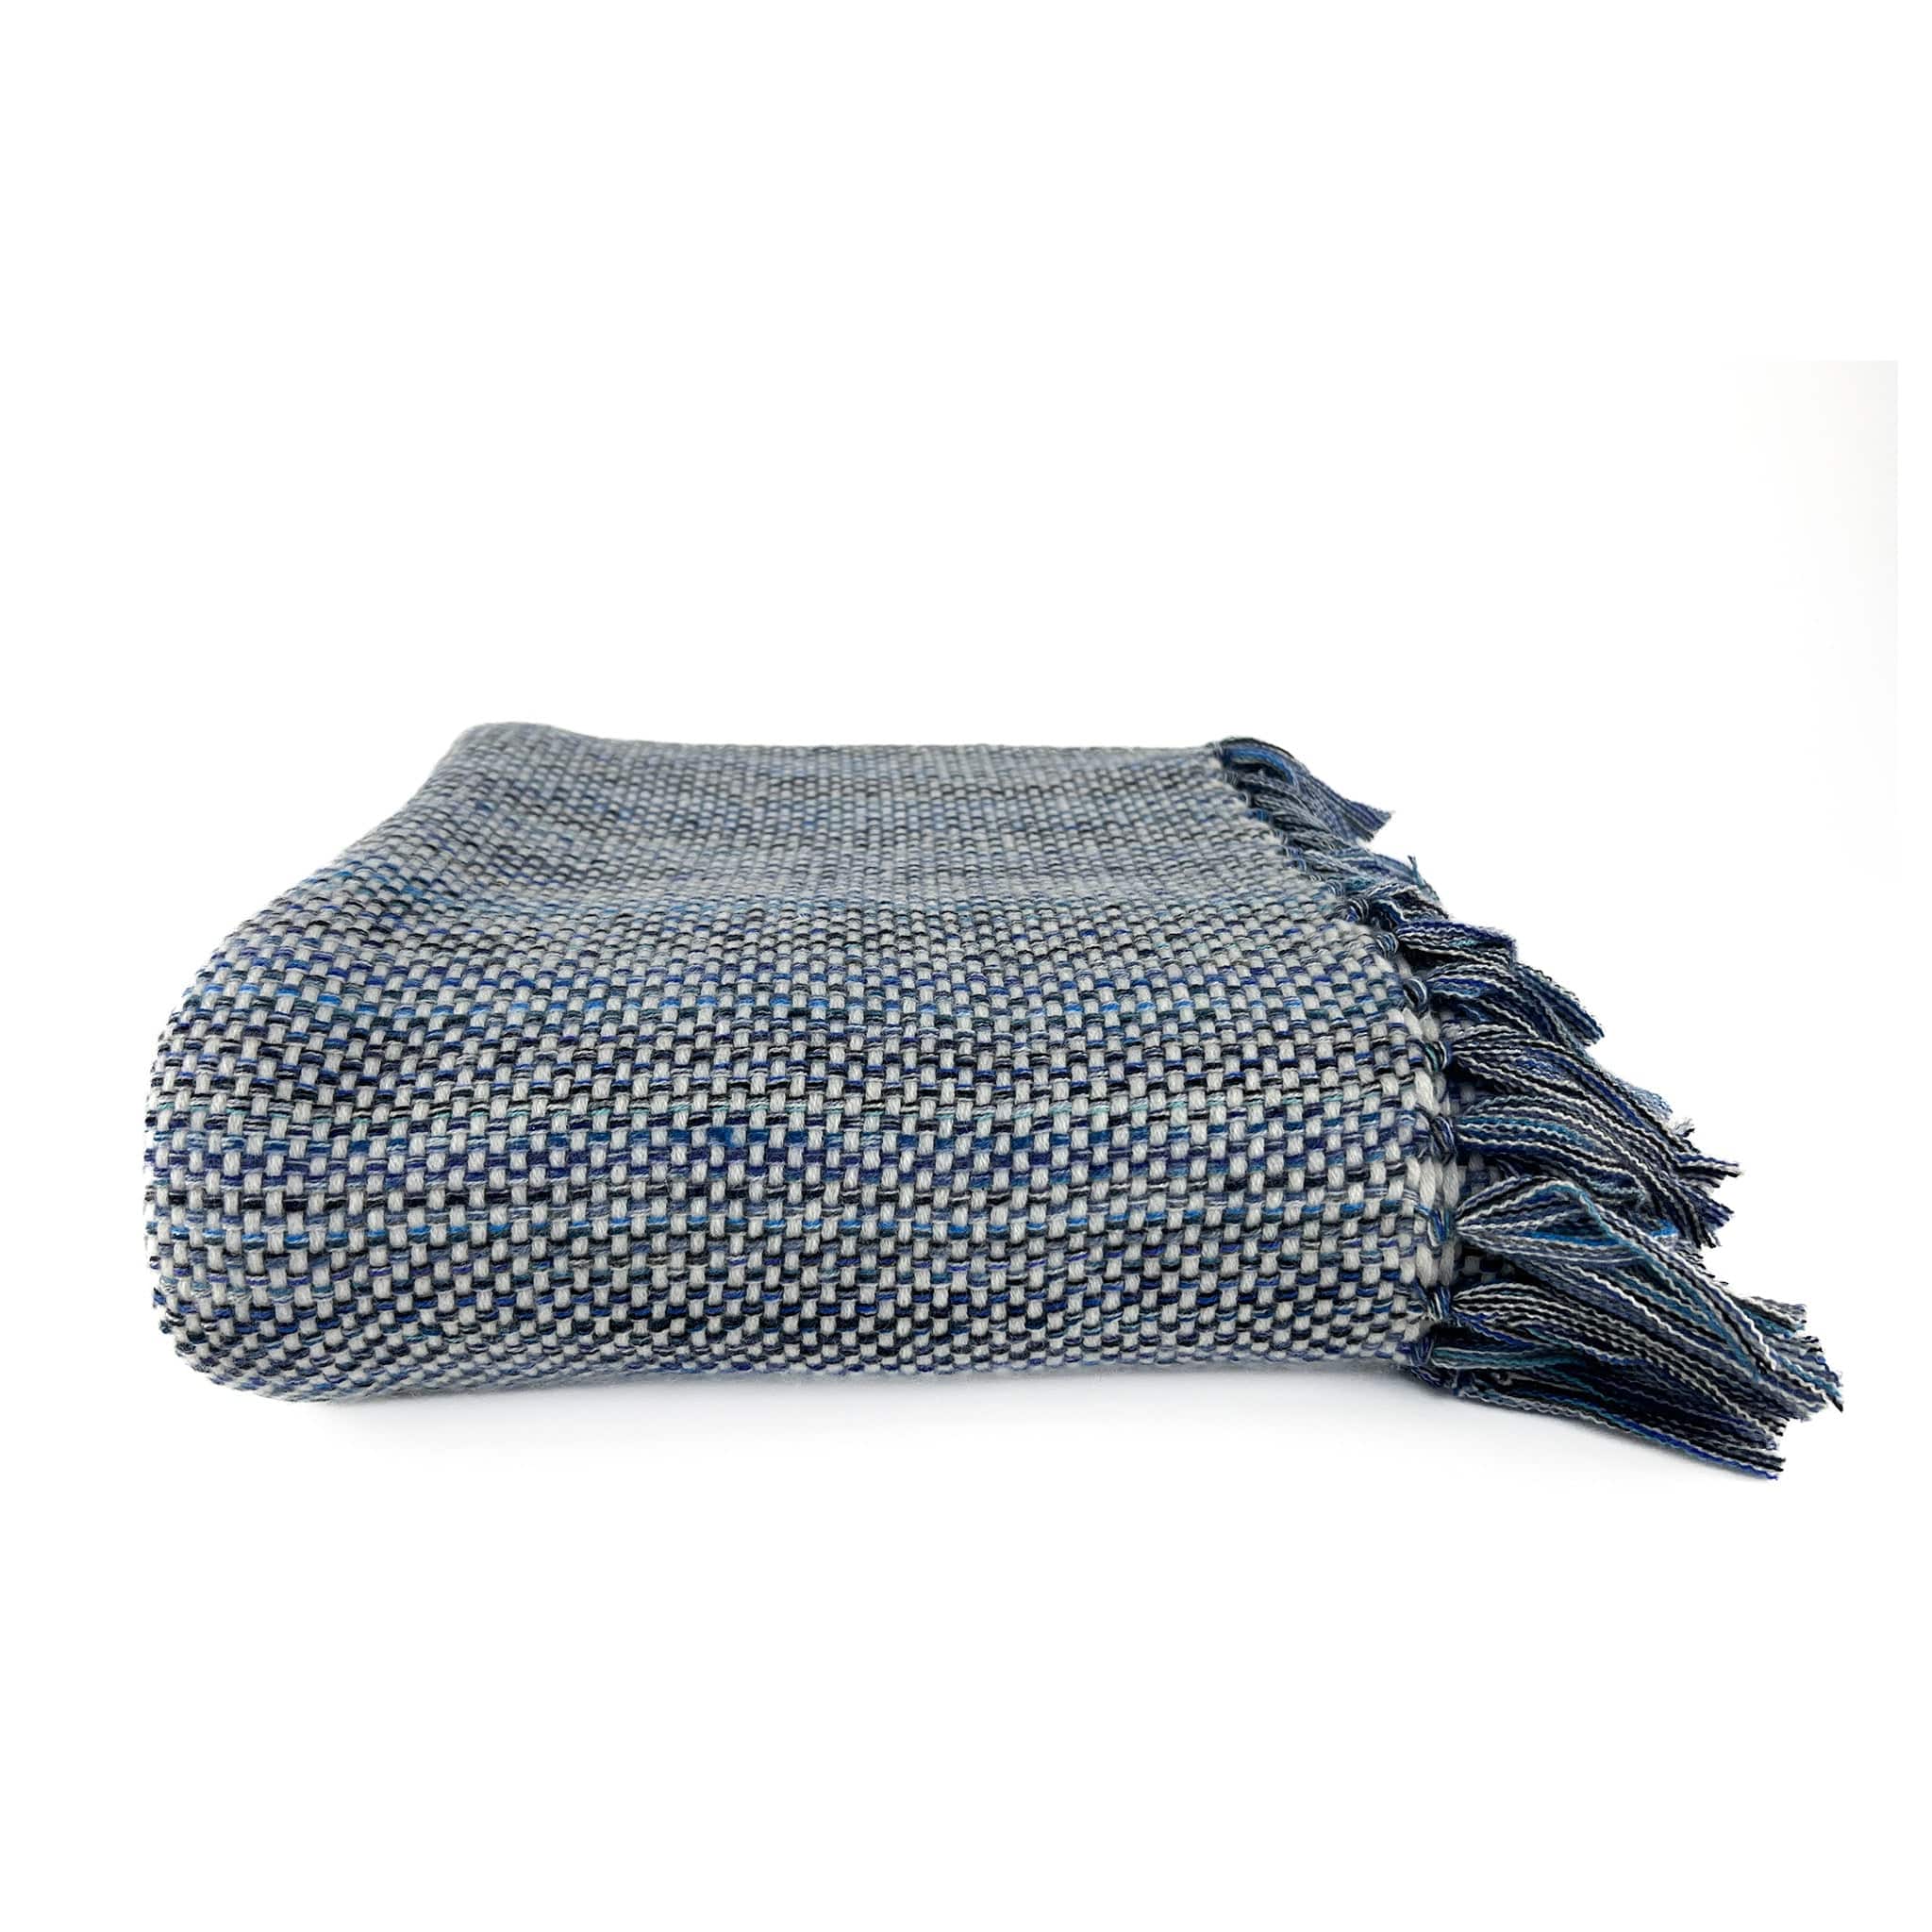 An Italian made Cashmere throw with a white weft and different shades of blue warp, folded on a white background with handknotted multiple shades of blue tassels showing on the right hand side